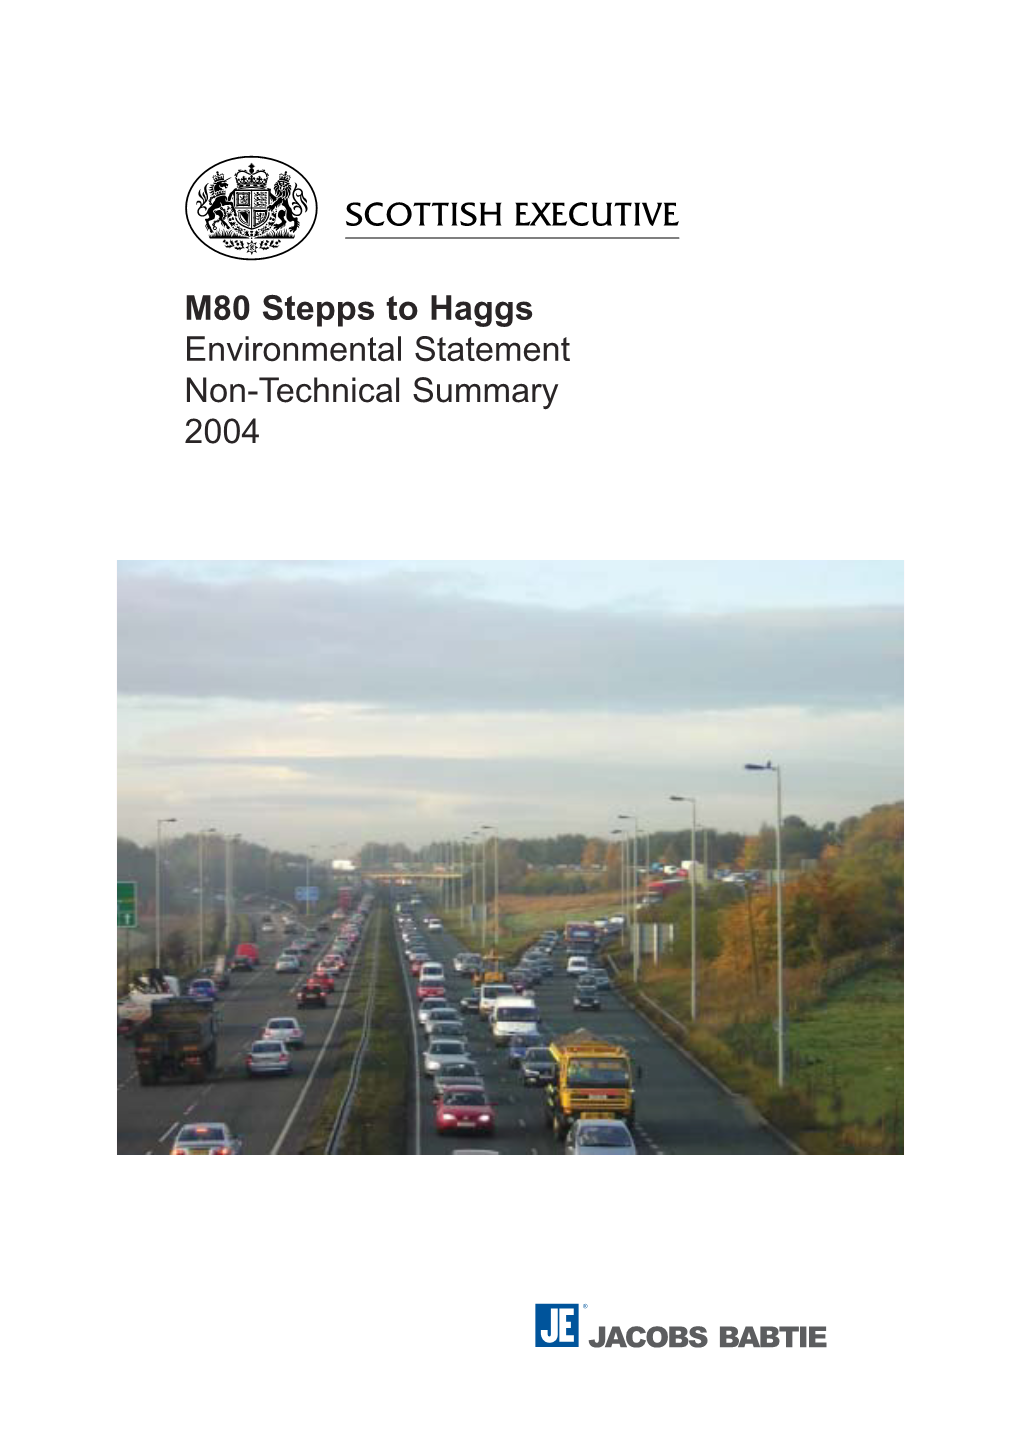 M80 Stepps to Haggs Environmental Statement Non-Technical Summary 2004 Introduction